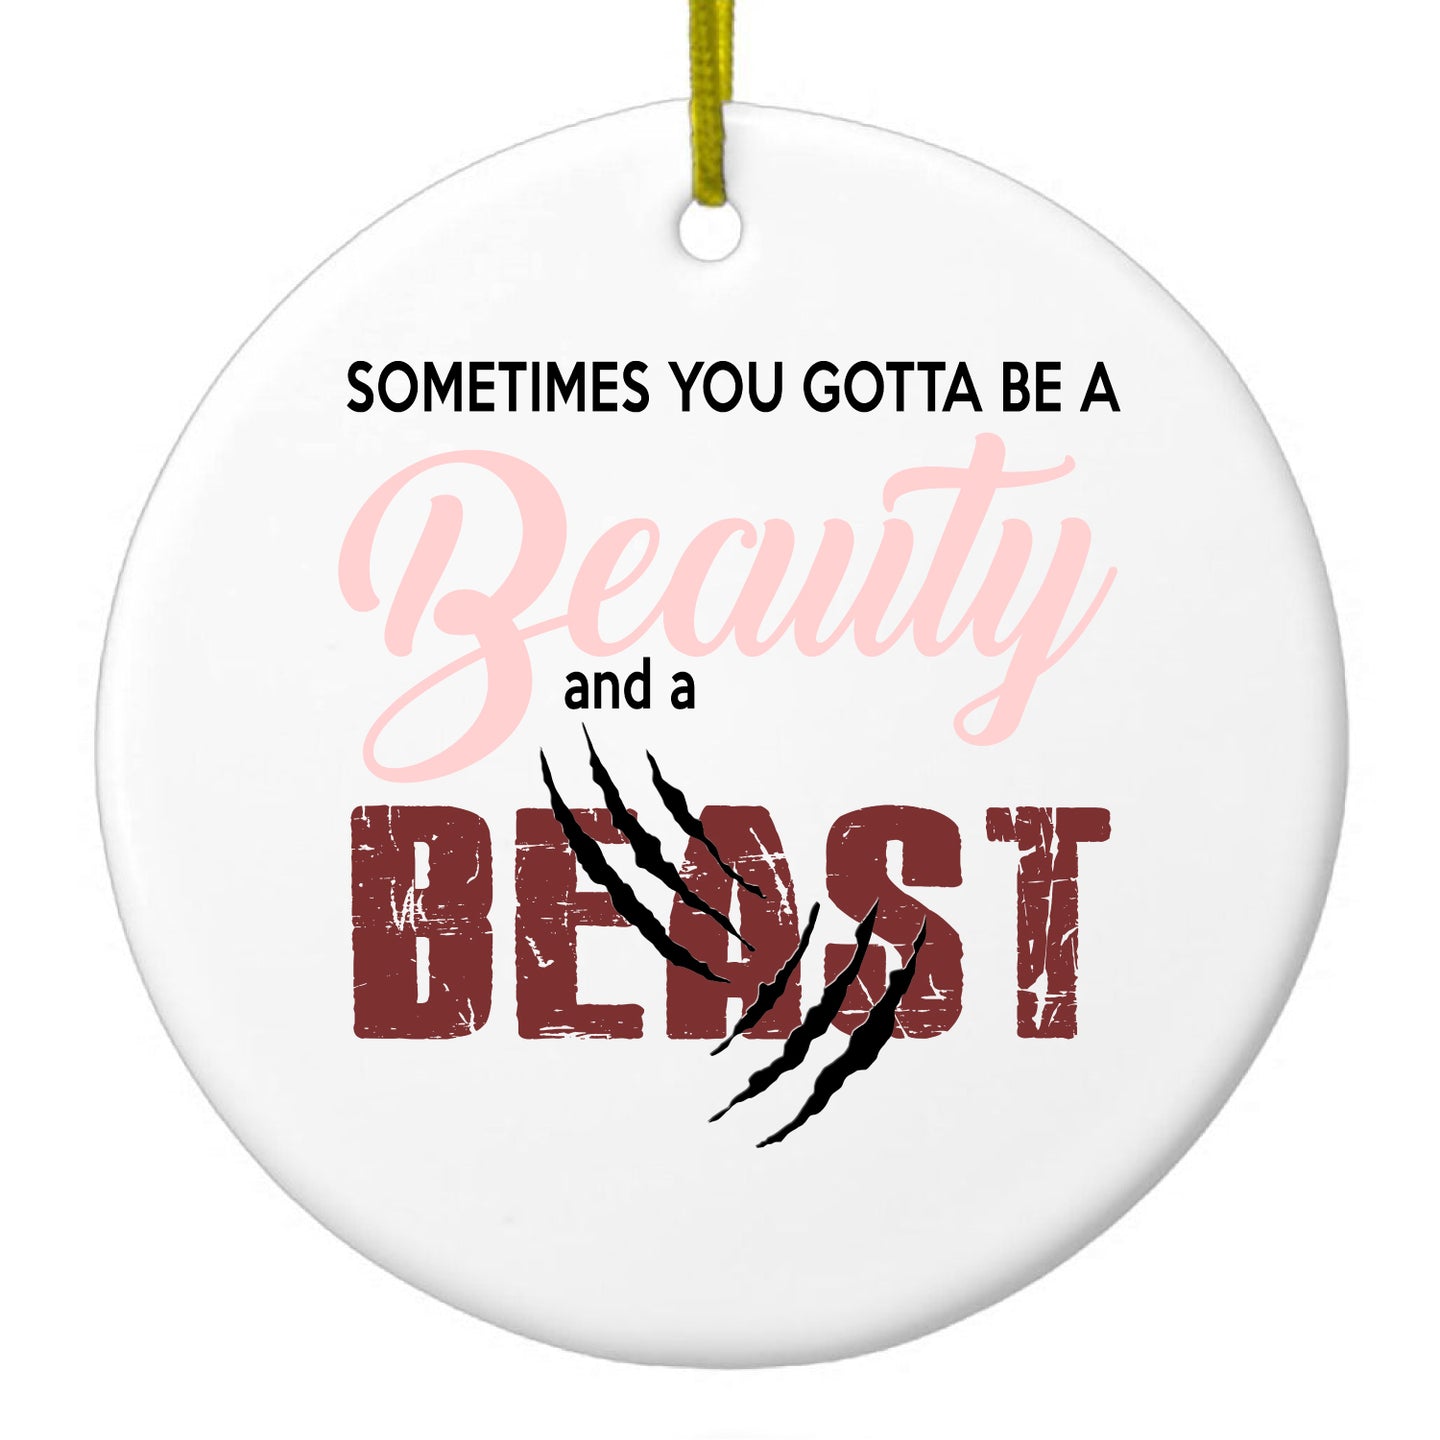 DistinctInk® Hanging Ceramic Christmas Tree Ornament with Gold String - Great Gift / Present - 2 3/4 inch Diameter - Sometimes You Gotta be a Beauty & A Beast